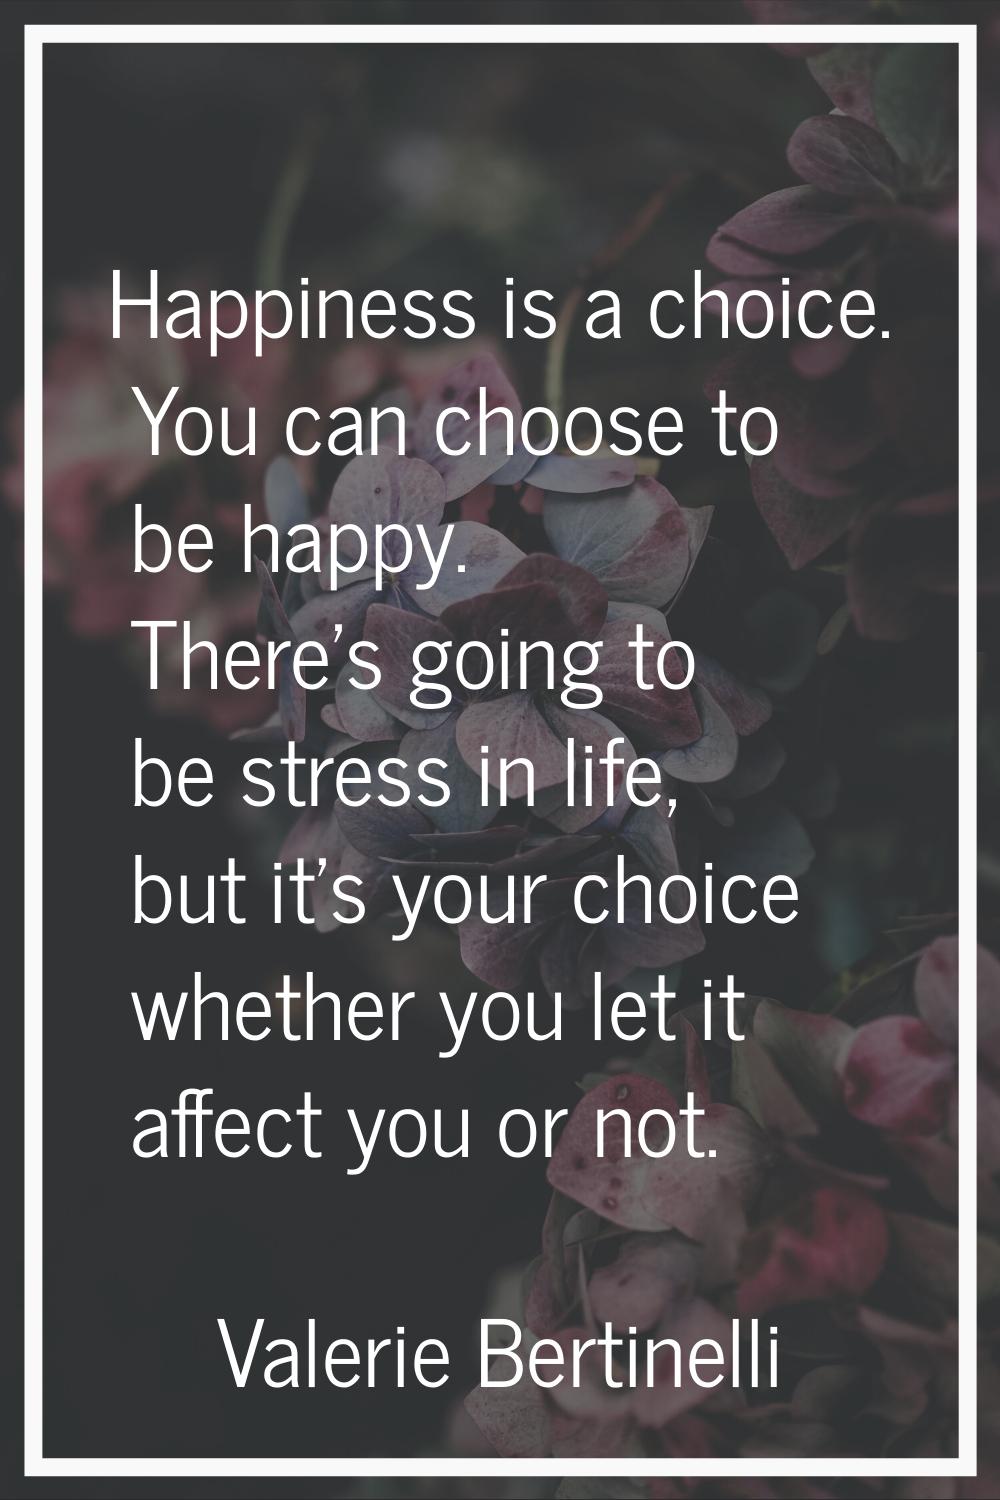 Happiness is a choice. You can choose to be happy. There's going to be stress in life, but it's you